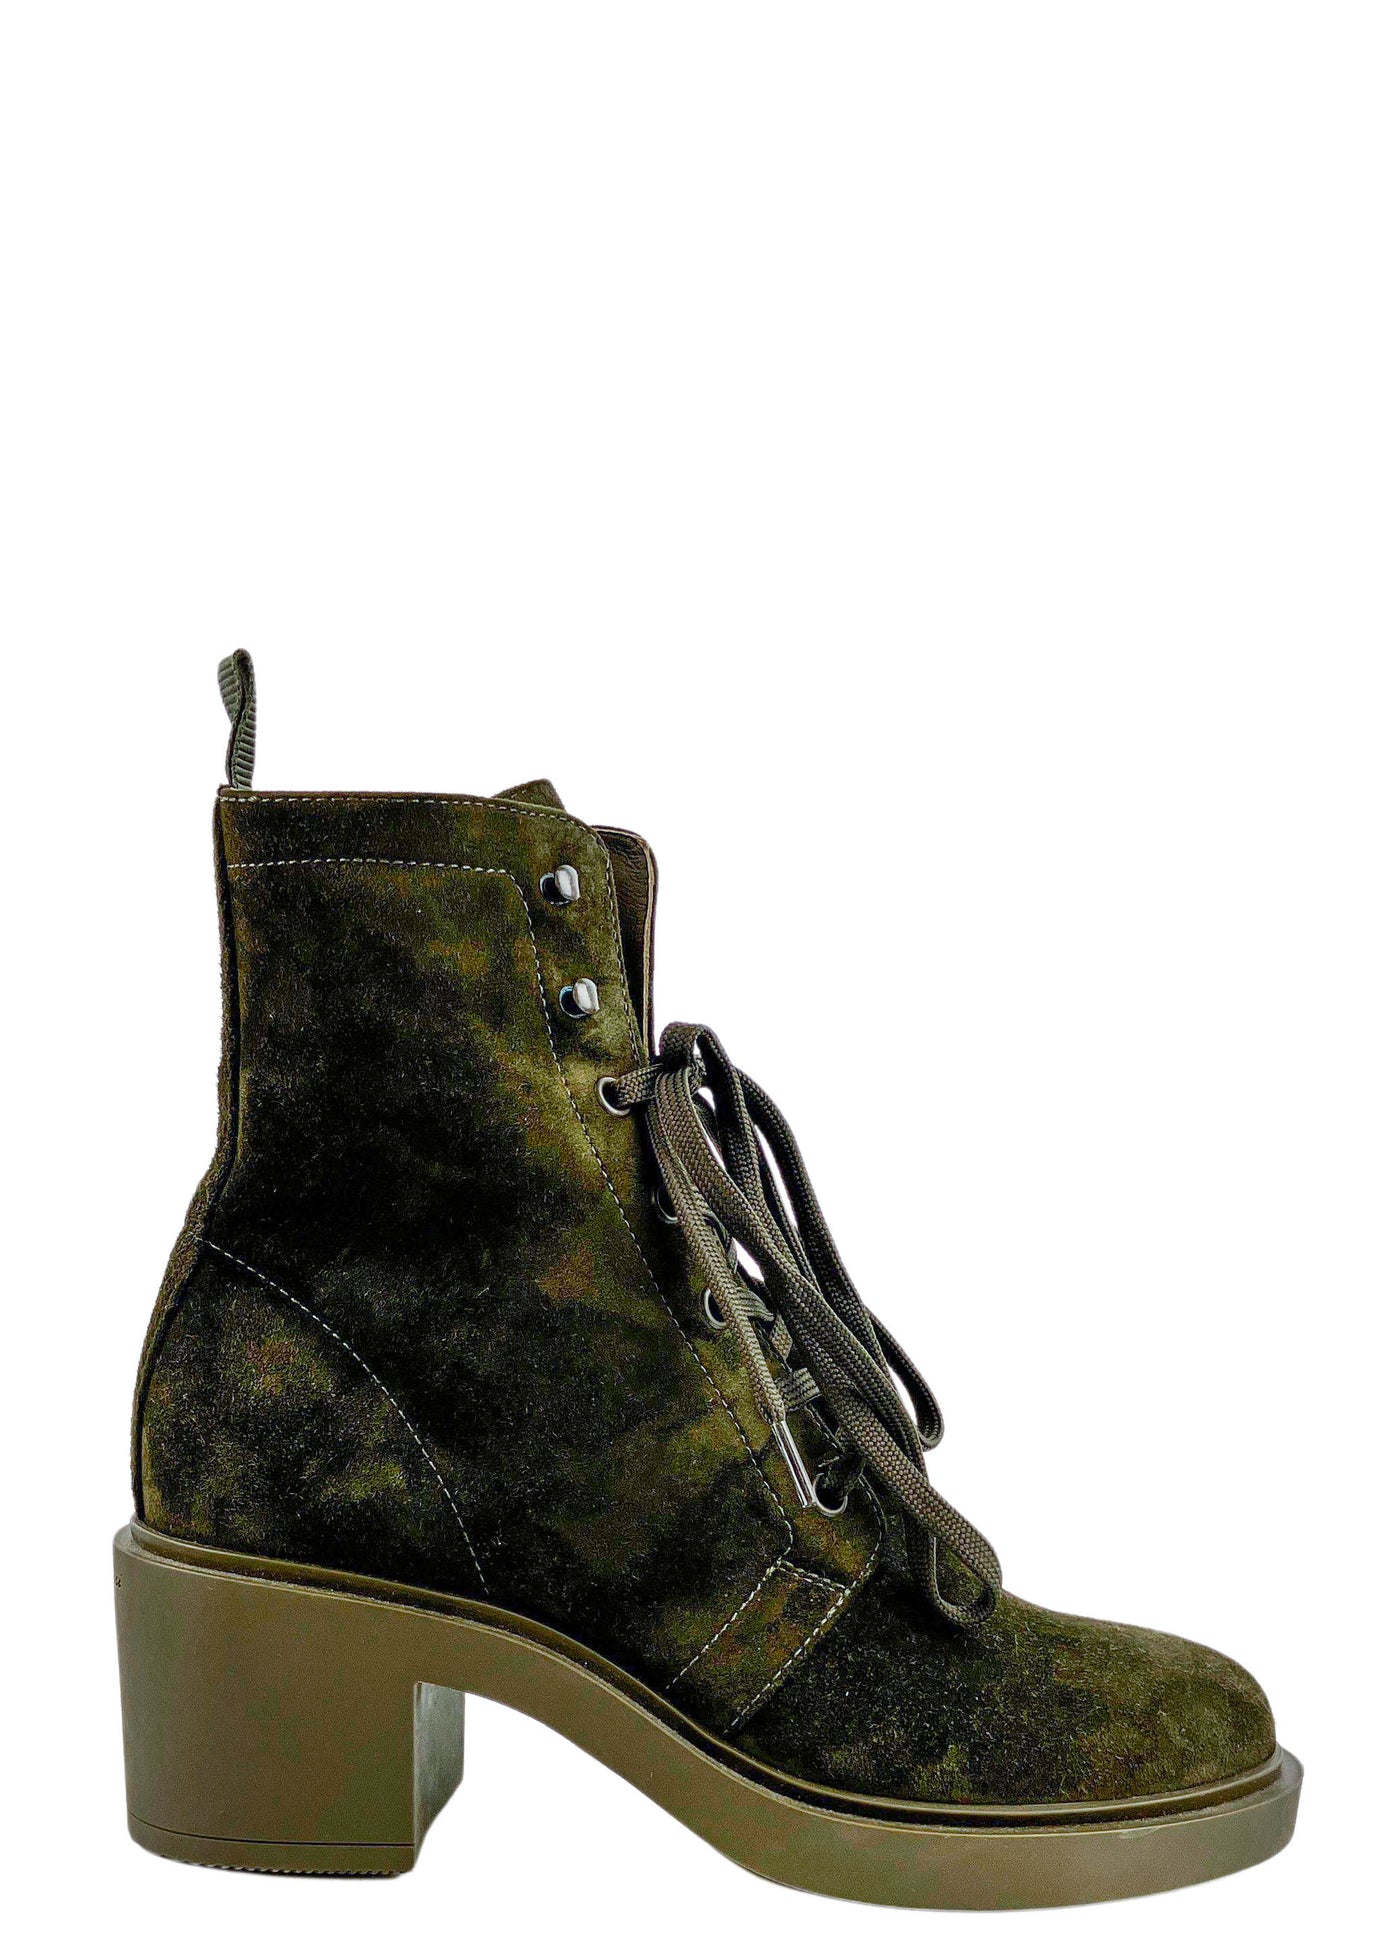 Gianvito Rossi Suede Lace Up Ankle Boots in Dark Olive - Discounts on Gianvito Rossi at UAL